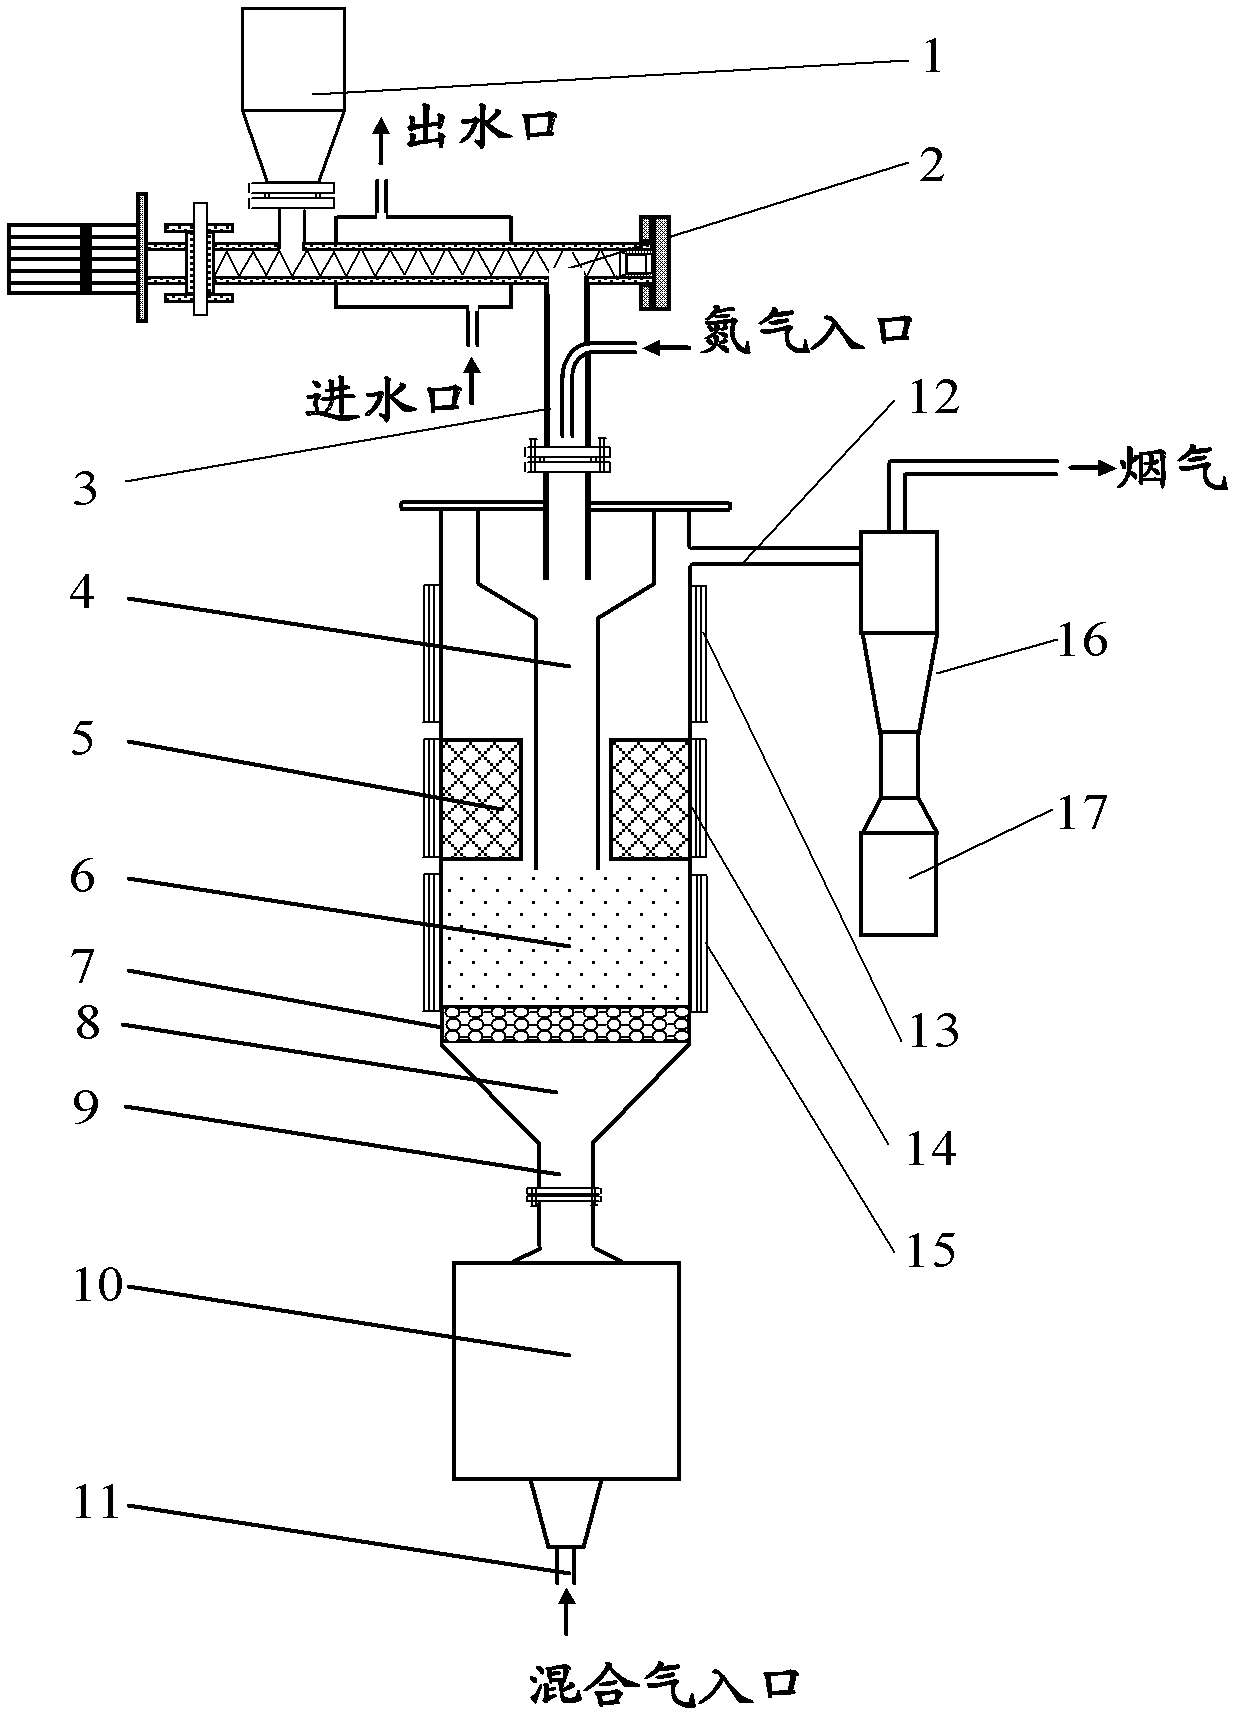 Three-stage gasification device for producing synthesis gas through biomass pyrolysis and gasification